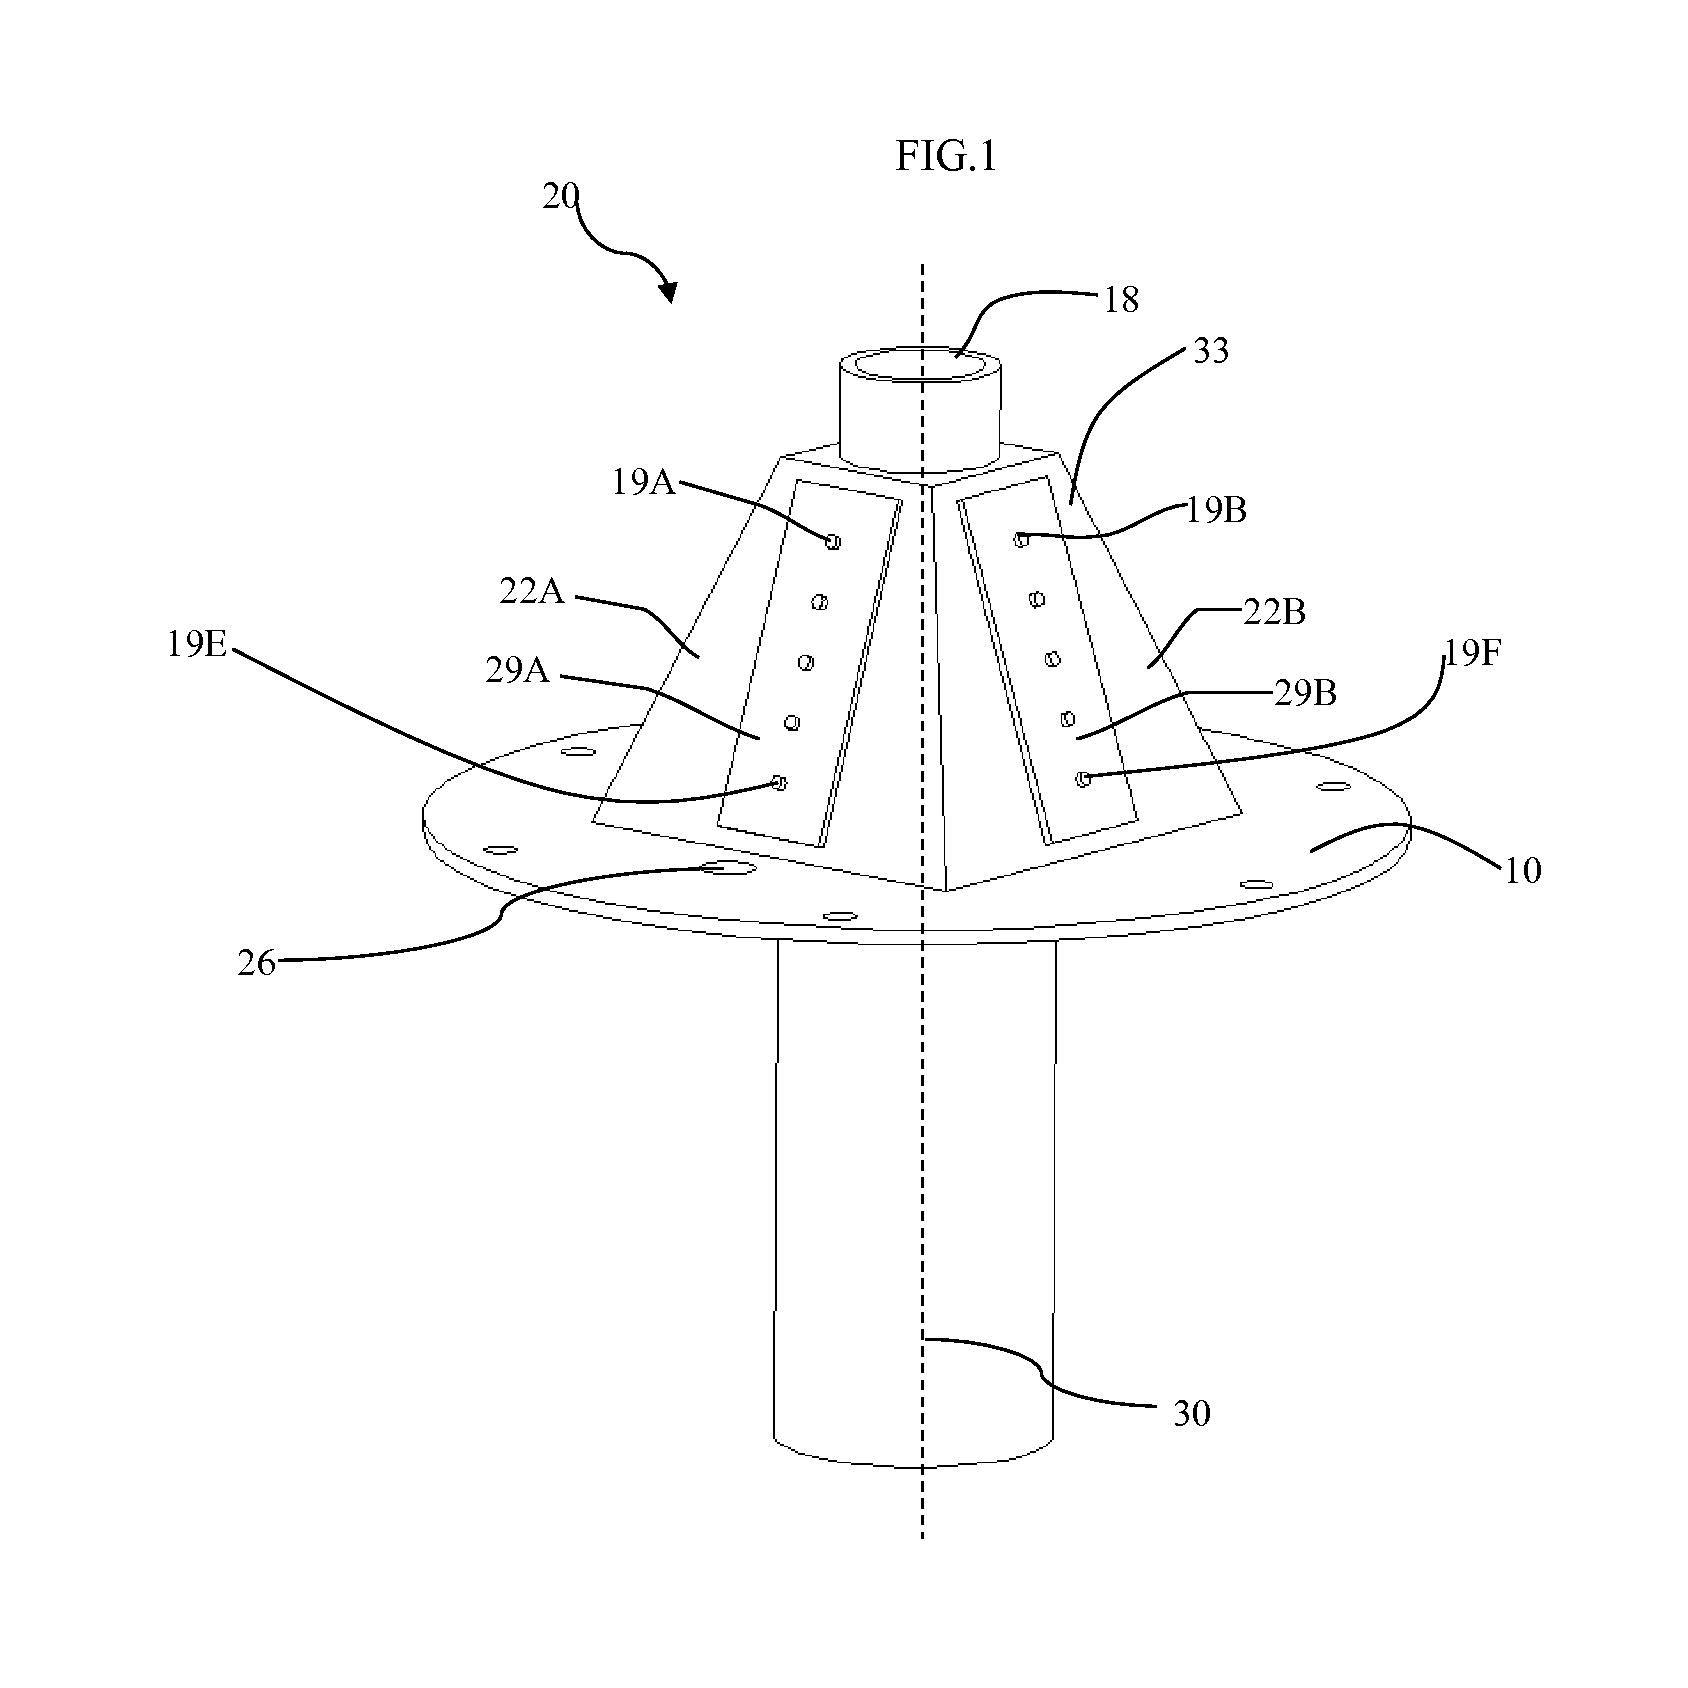 Adjustable Depth Anchoring System For An Underwater Light